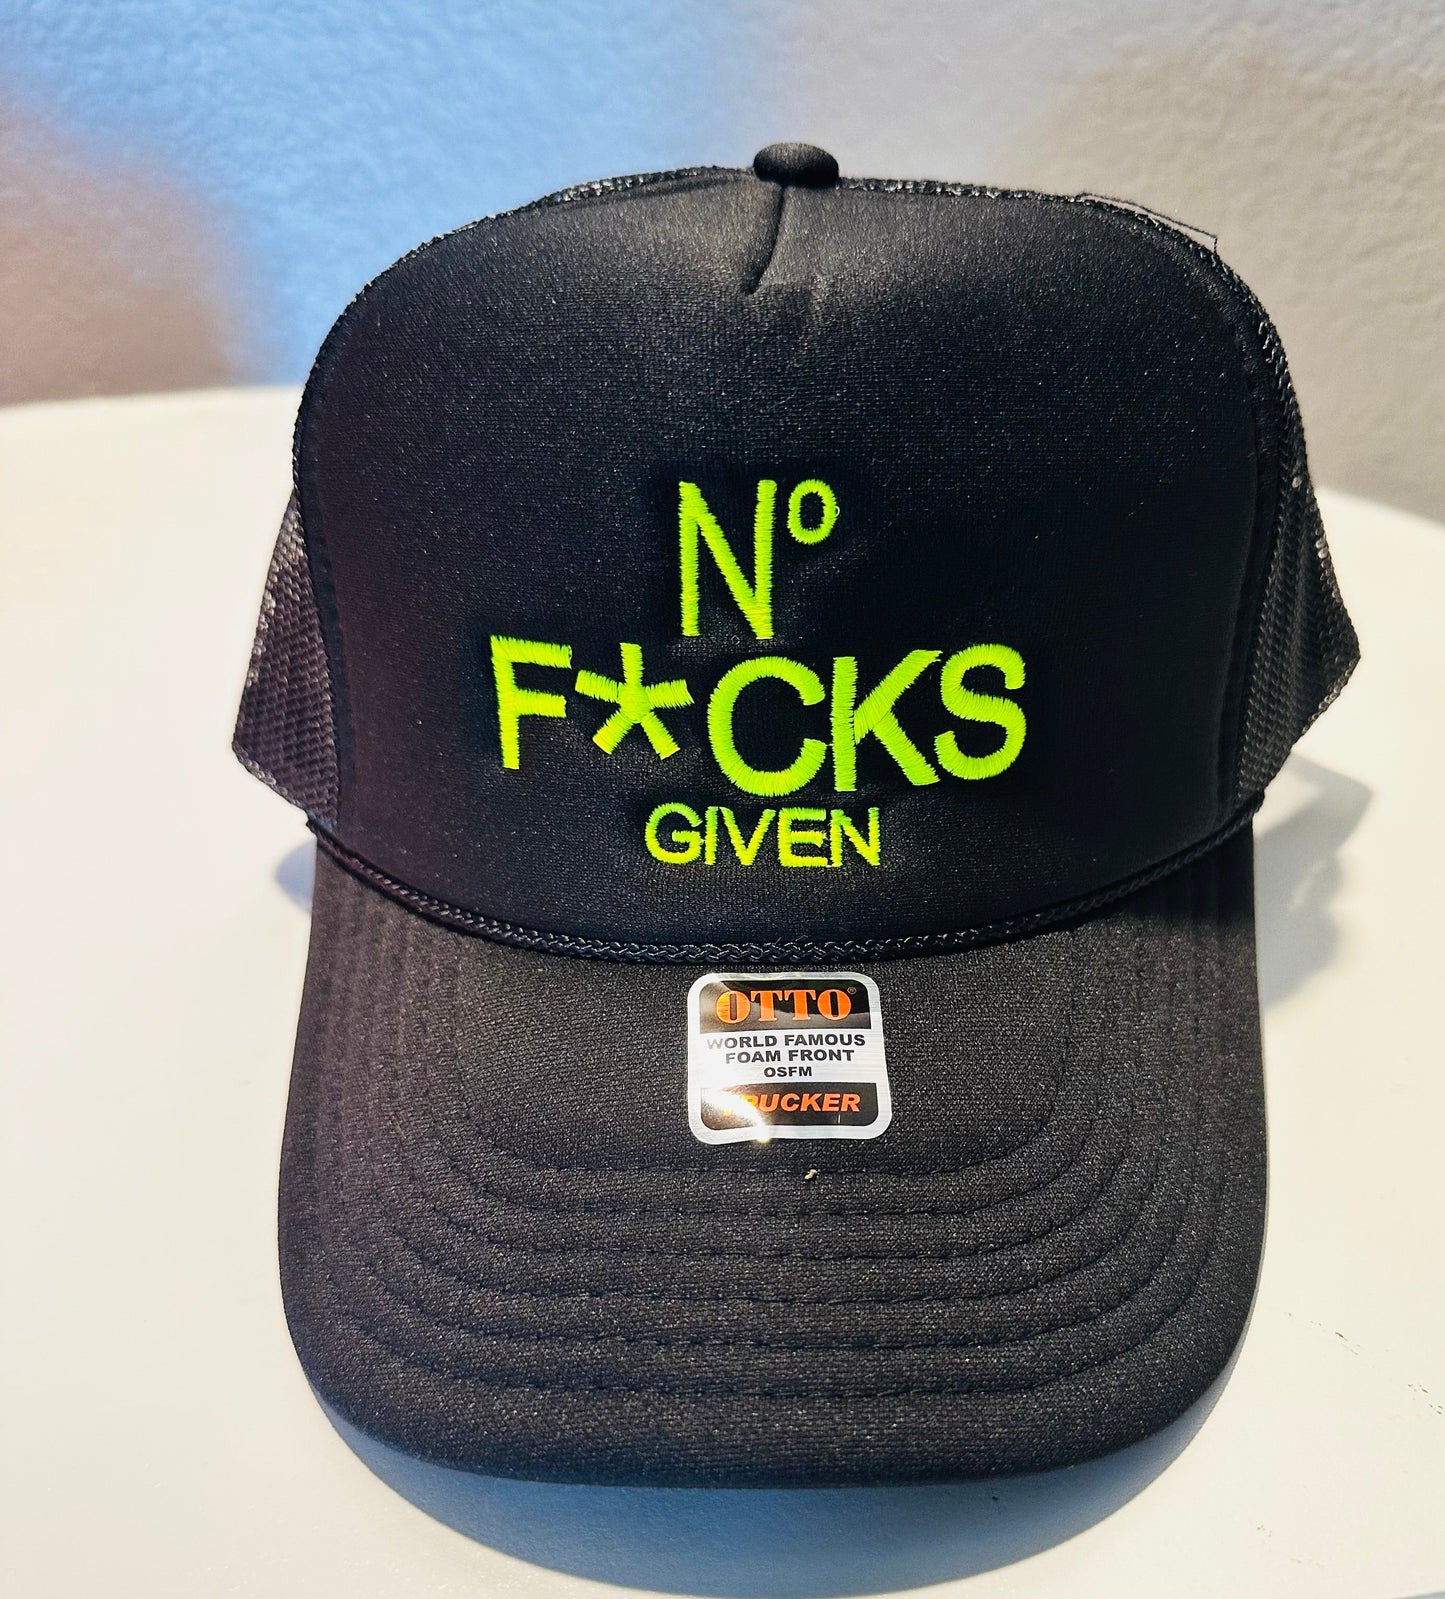 No F*cks Given Embroidered Black Trucker Hat